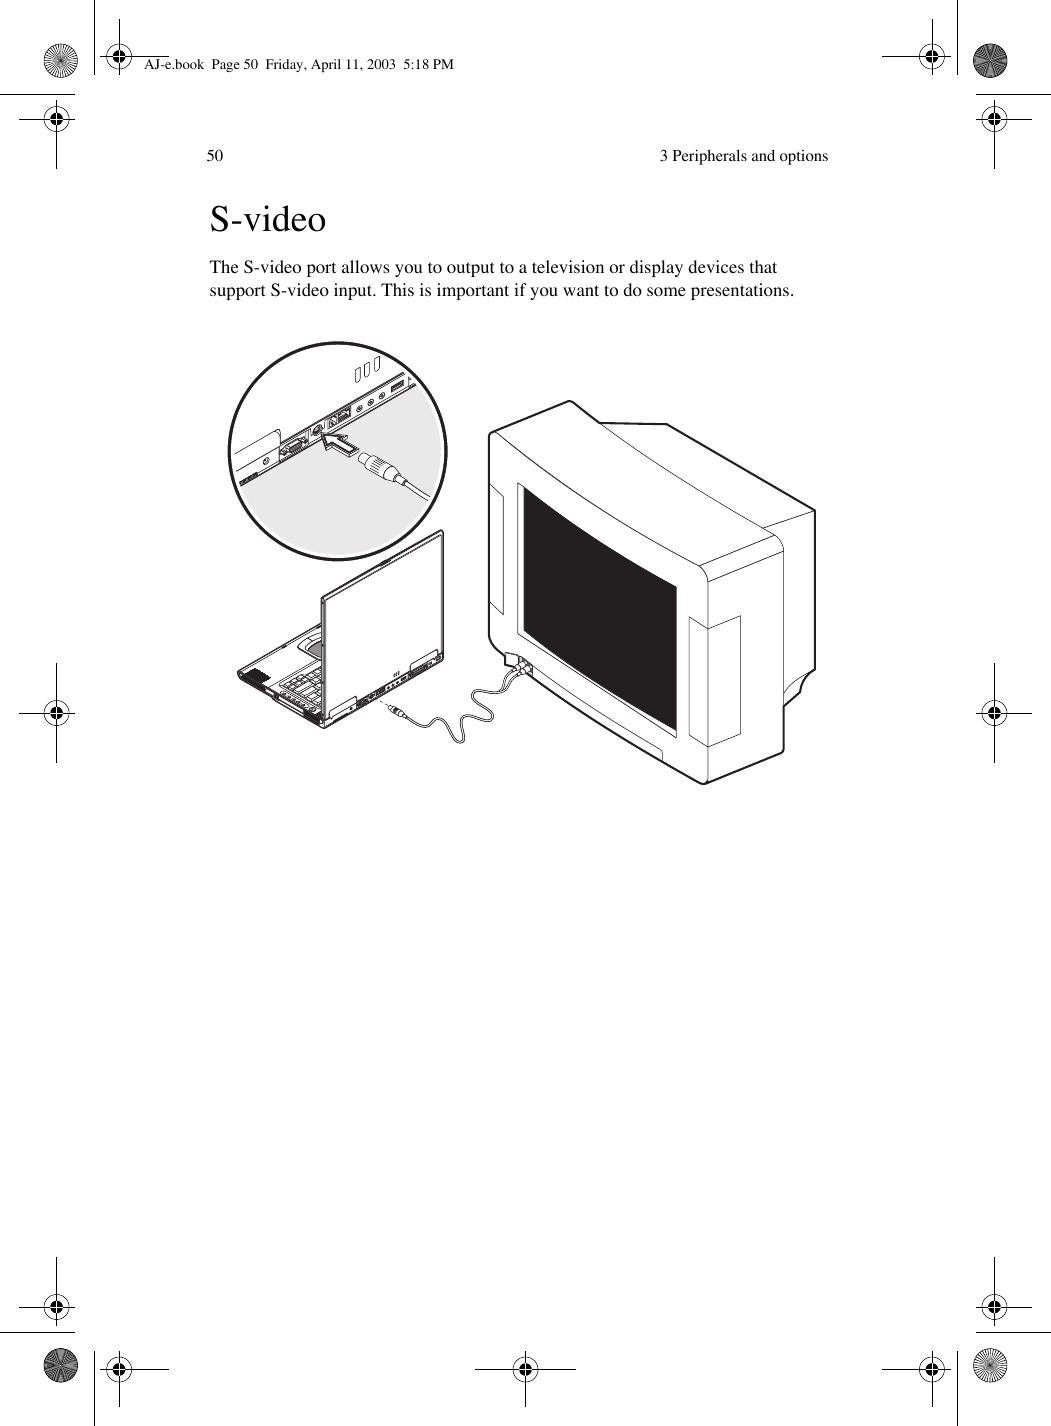  3 Peripherals and options50S-videoThe S-video port allows you to output to a television or display devices that support S-video input. This is important if you want to do some presentations.AJ-e.book  Page 50  Friday, April 11, 2003  5:18 PM